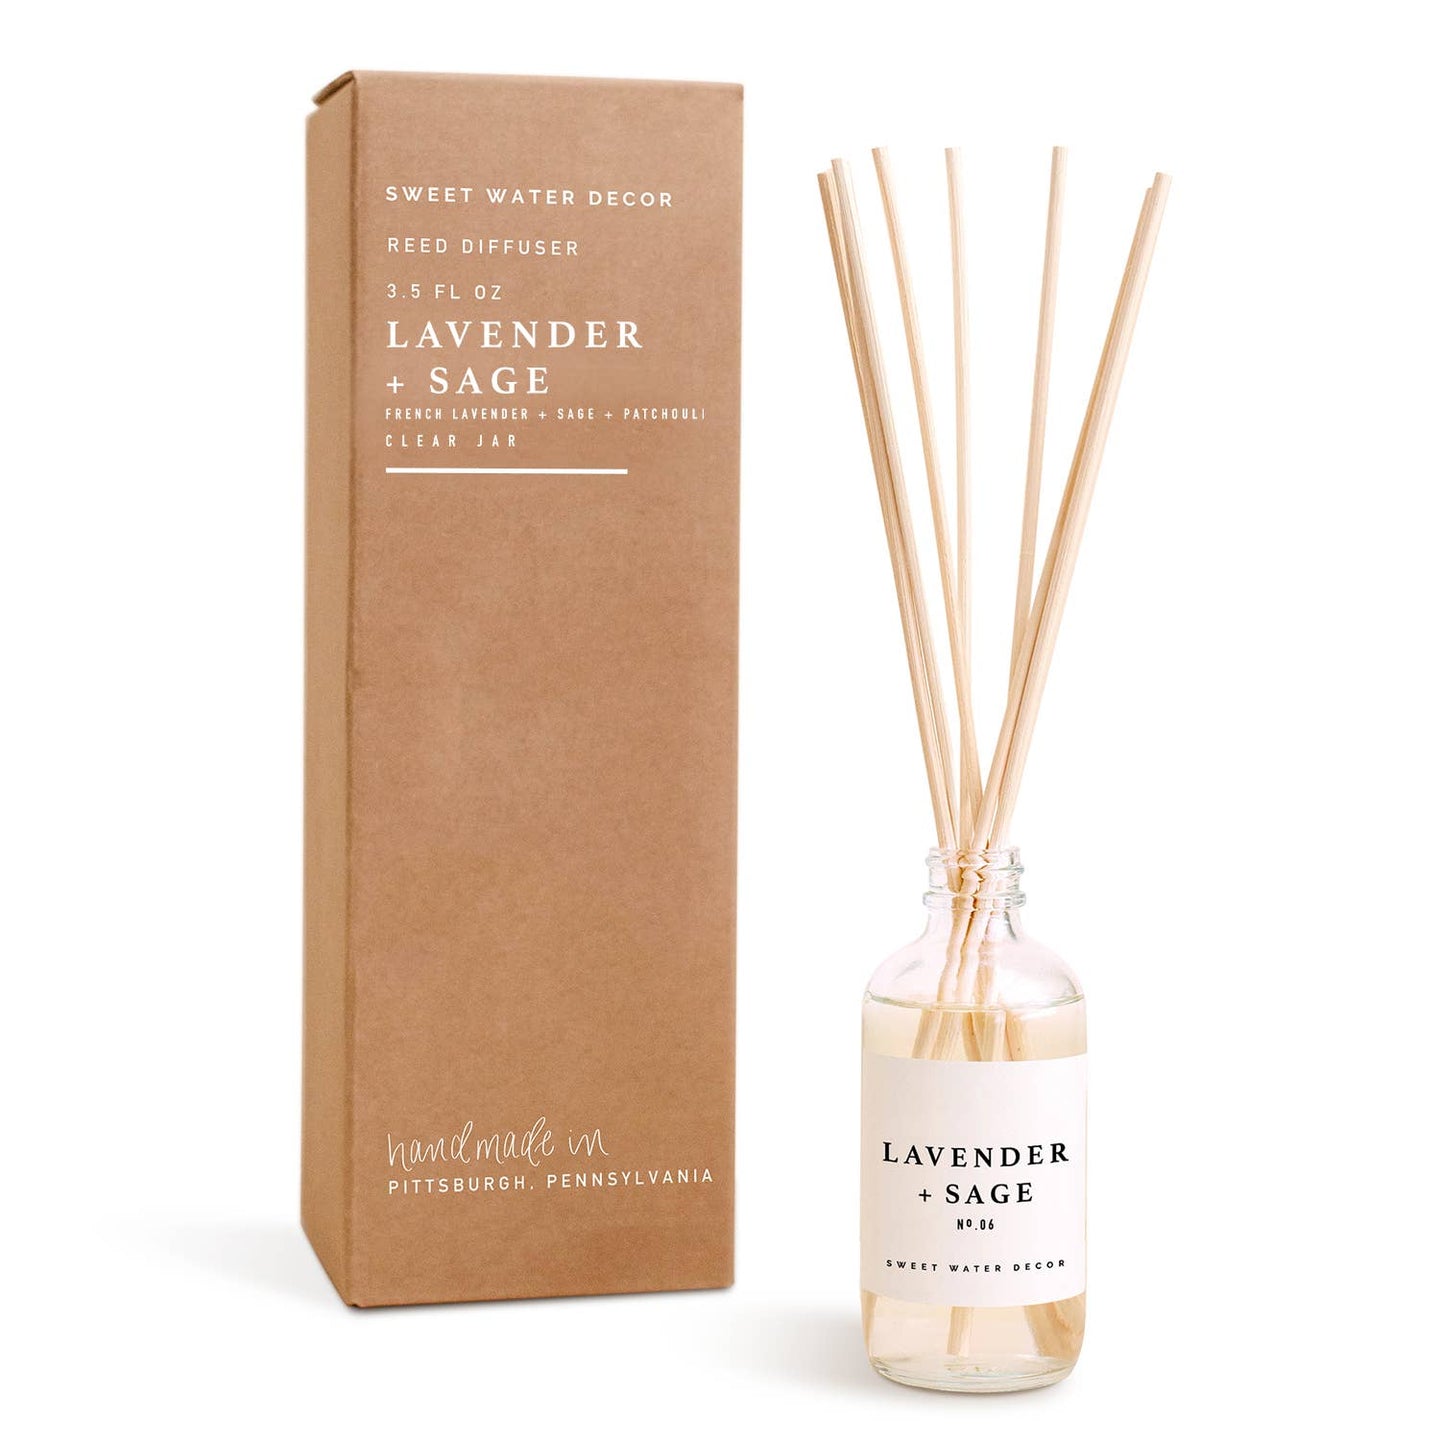 Sweet Water Decor - Lavender and Sage Reed Diffuser - Clear Jar - 3.5 oz